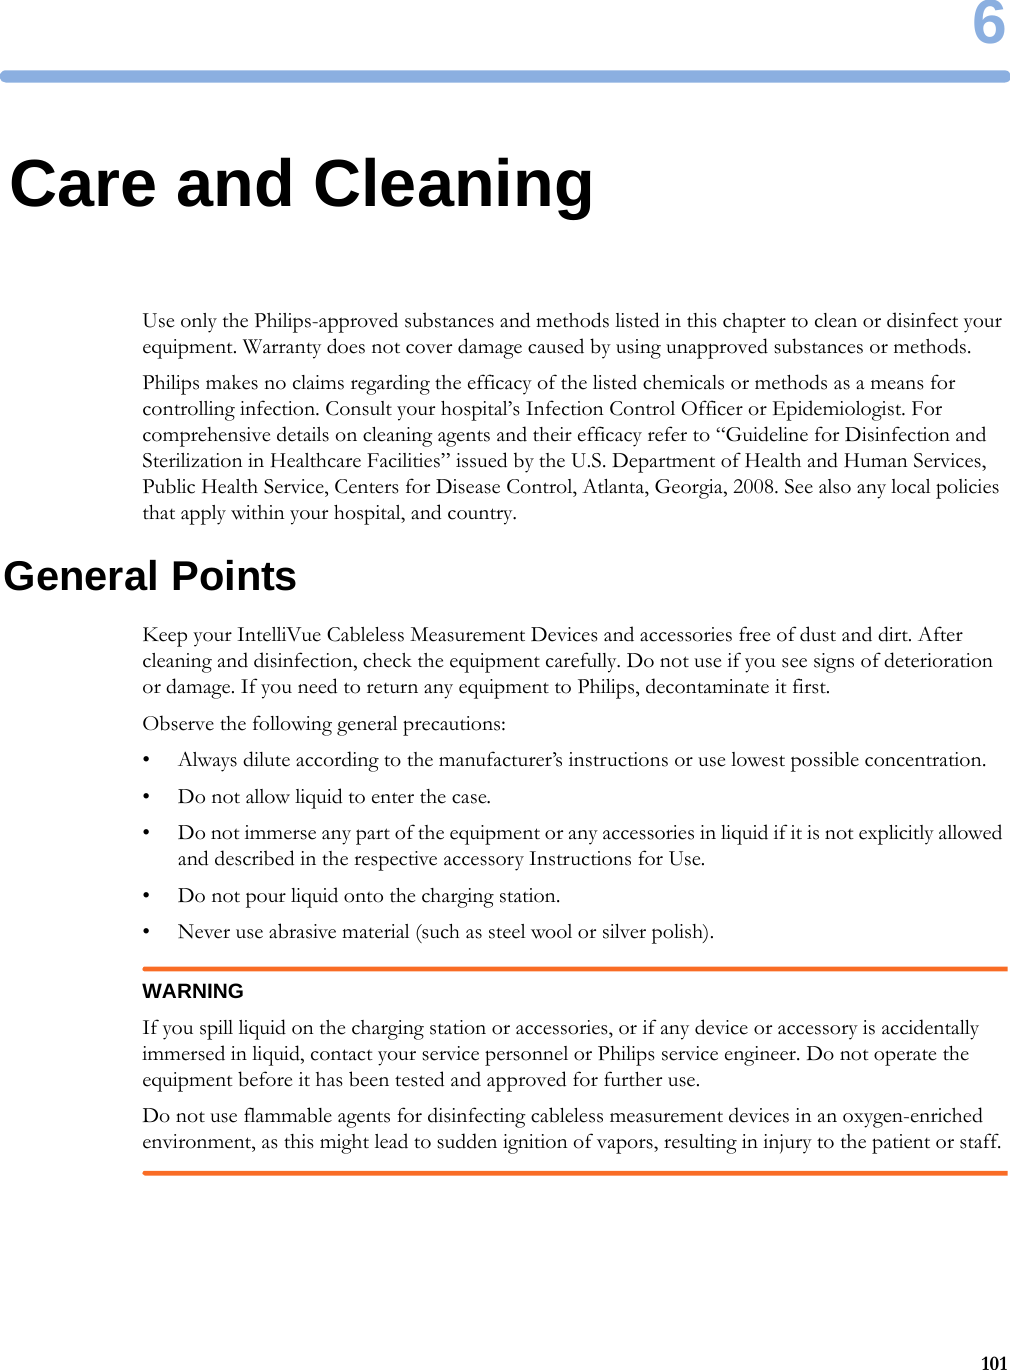 61016Care and CleaningUse only the Philips-approved substances and methods listed in this chapter to clean or disinfect your equipment. Warranty does not cover damage caused by using unapproved substances or methods.Philips makes no claims regarding the efficacy of the listed chemicals or methods as a means for controlling infection. Consult your hospital’s Infection Control Officer or Epidemiologist. For comprehensive details on cleaning agents and their efficacy refer to “Guideline for Disinfection and Sterilization in Healthcare Facilities” issued by the U.S. Department of Health and Human Services, Public Health Service, Centers for Disease Control, Atlanta, Georgia, 2008. See also any local policies that apply within your hospital, and country.General PointsKeep your IntelliVue Cableless Measurement Devices and accessories free of dust and dirt. After cleaning and disinfection, check the equipment carefully. Do not use if you see signs of deterioration or damage. If you need to return any equipment to Philips, decontaminate it first.Observe the following general precautions:• Always dilute according to the manufacturer’s instructions or use lowest possible concentration.• Do not allow liquid to enter the case.• Do not immerse any part of the equipment or any accessories in liquid if it is not explicitly allowed and described in the respective accessory Instructions for Use.• Do not pour liquid onto the charging station.• Never use abrasive material (such as steel wool or silver polish).WARNINGIf you spill liquid on the charging station or accessories, or if any device or accessory is accidentally immersed in liquid, contact your service personnel or Philips service engineer. Do not operate the equipment before it has been tested and approved for further use.Do not use flammable agents for disinfecting cableless measurement devices in an oxygen-enriched environment, as this might lead to sudden ignition of vapors, resulting in injury to the patient or staff.